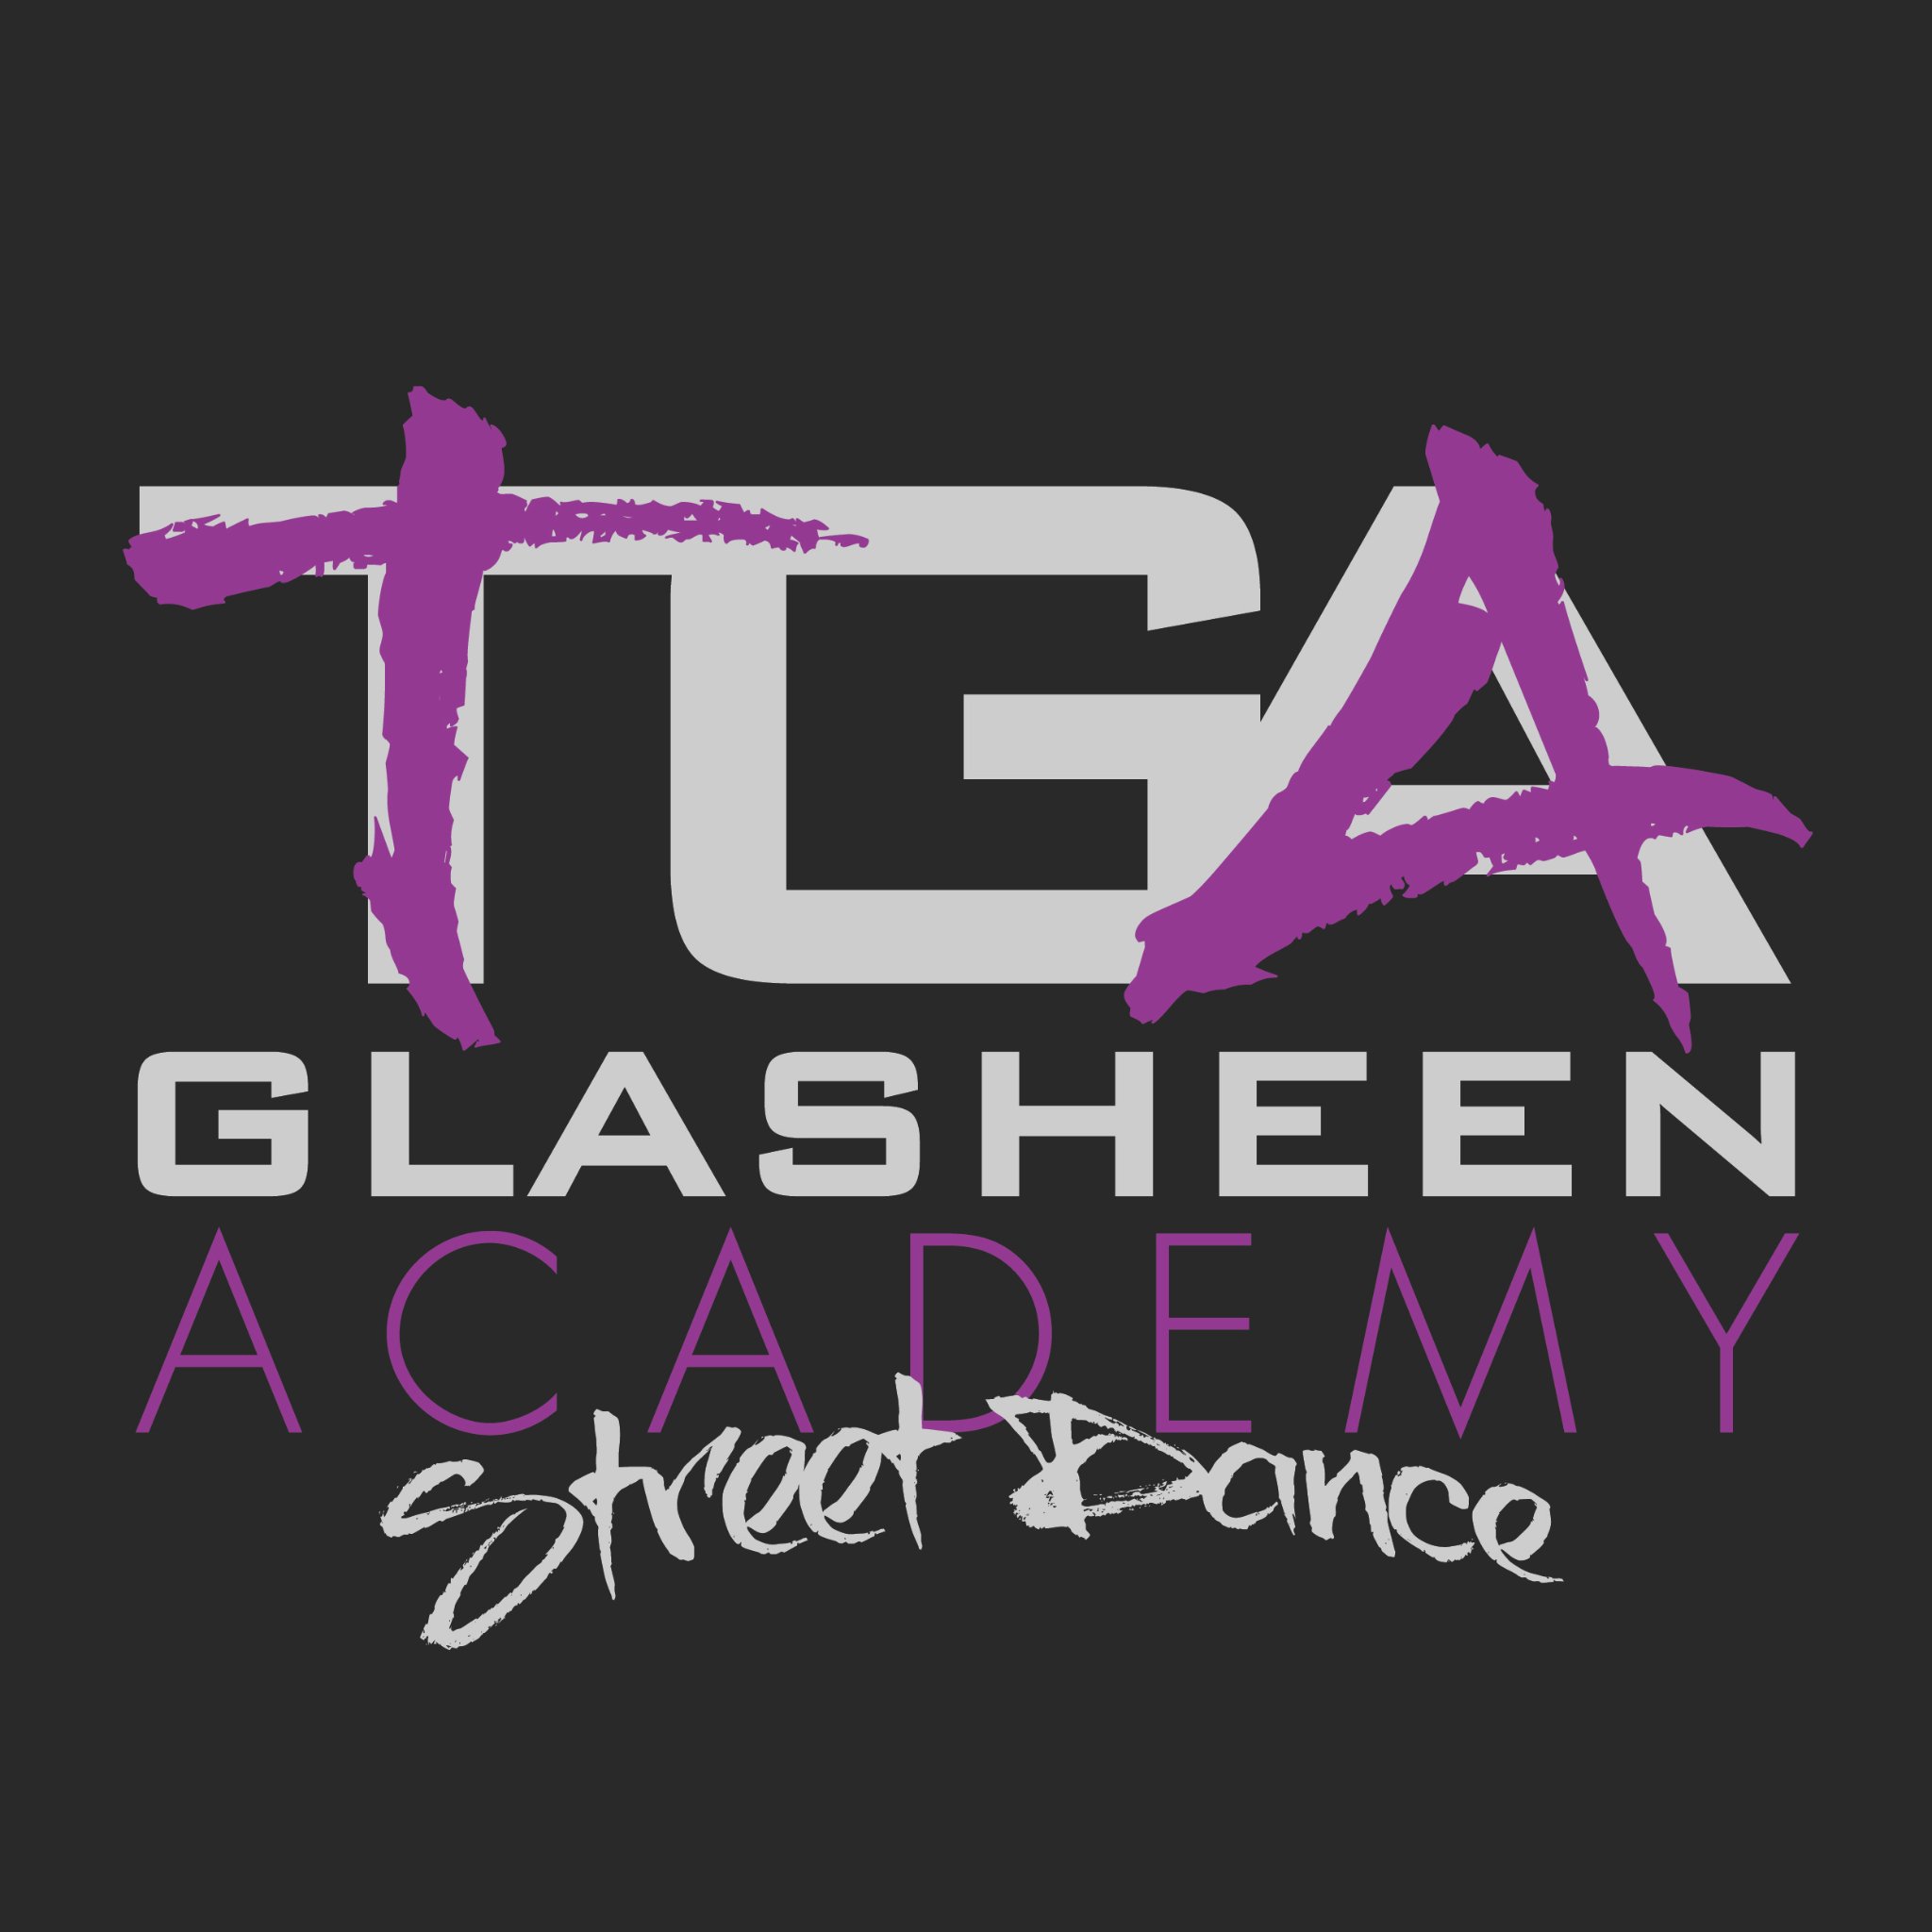 Crewe | Stoke on Trent #StreetDance #HipHip #BreakDance | Facebook: TGA Street Dance | Call: 0800 035 1507 | Email: enquiries@tgagroup.co.uk